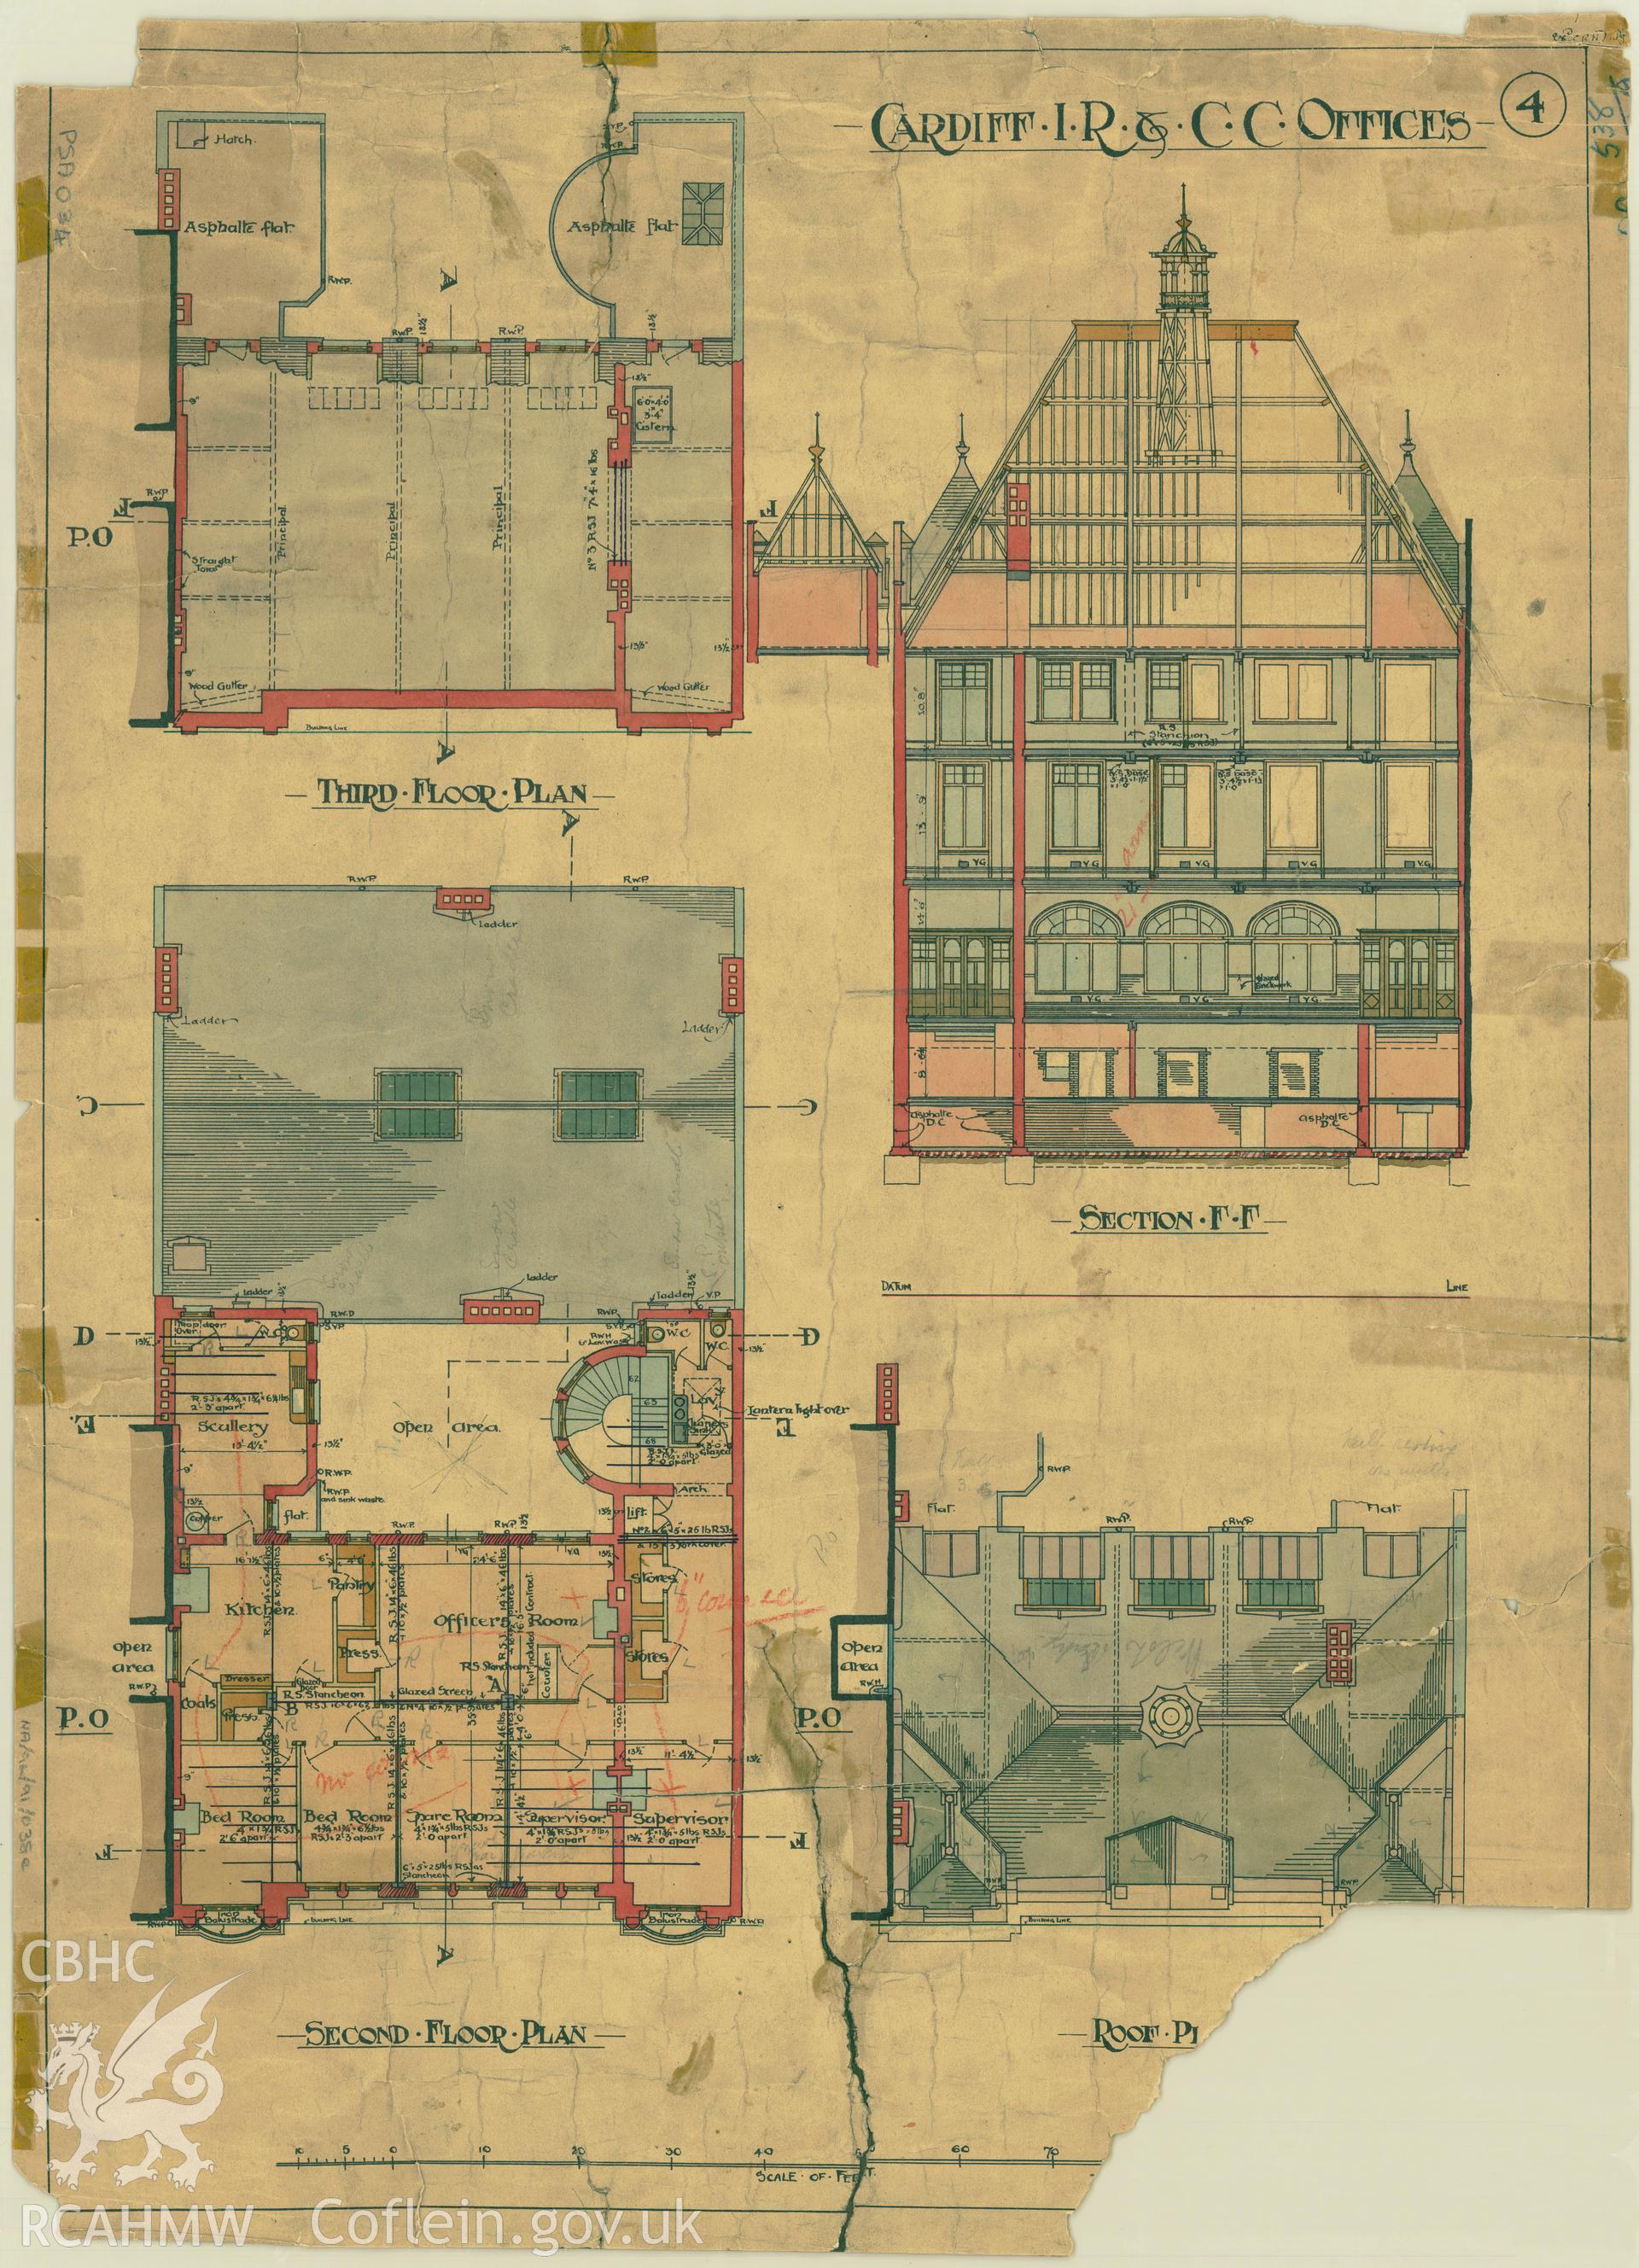 Cardiff Inland Revenue and County Court Offices; measured drawing showing second floor plan, third floor plan, roof plan and section view produced by H.M. Office of Works,  undated.